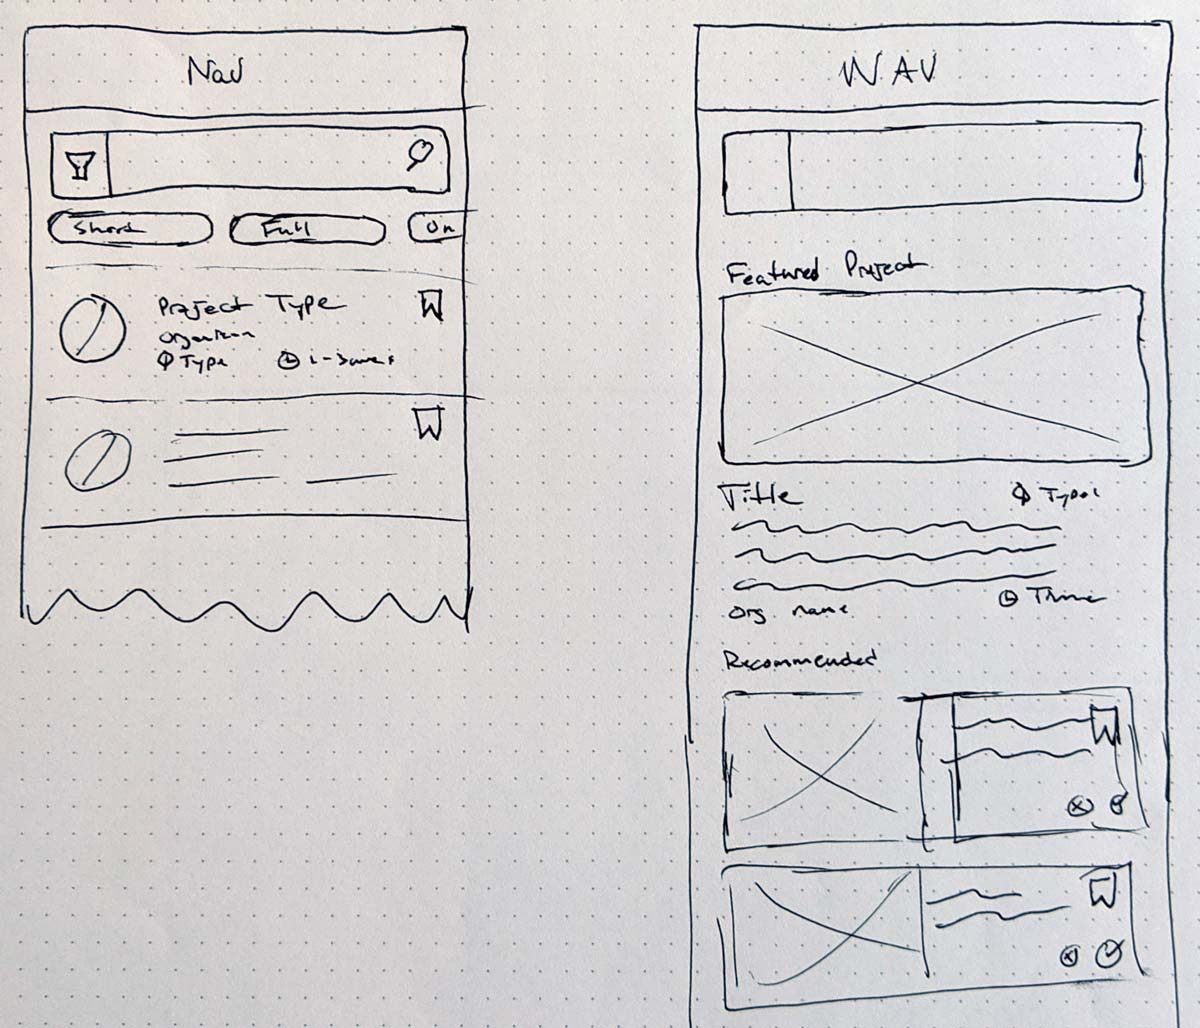 Sketch of category page with featured project